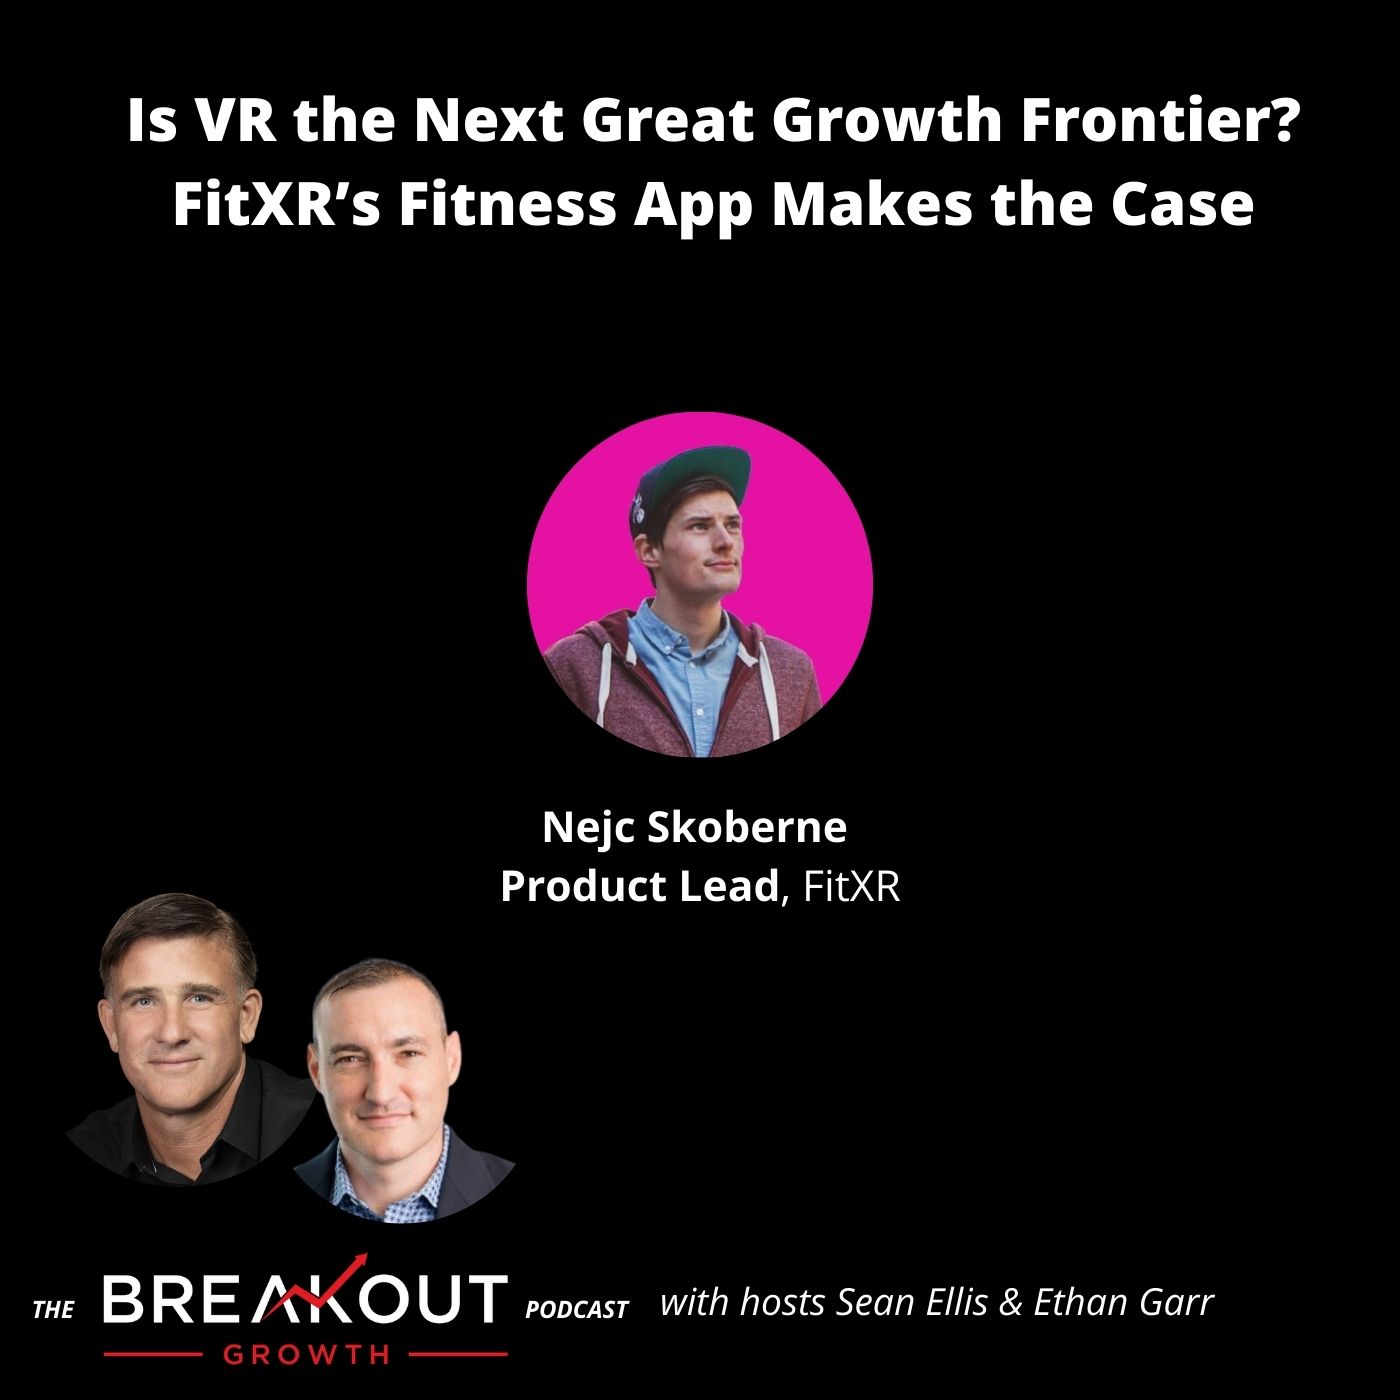 Is VR the Next Great Growth Frontier? FitXR’s Fitness App Makes the Case